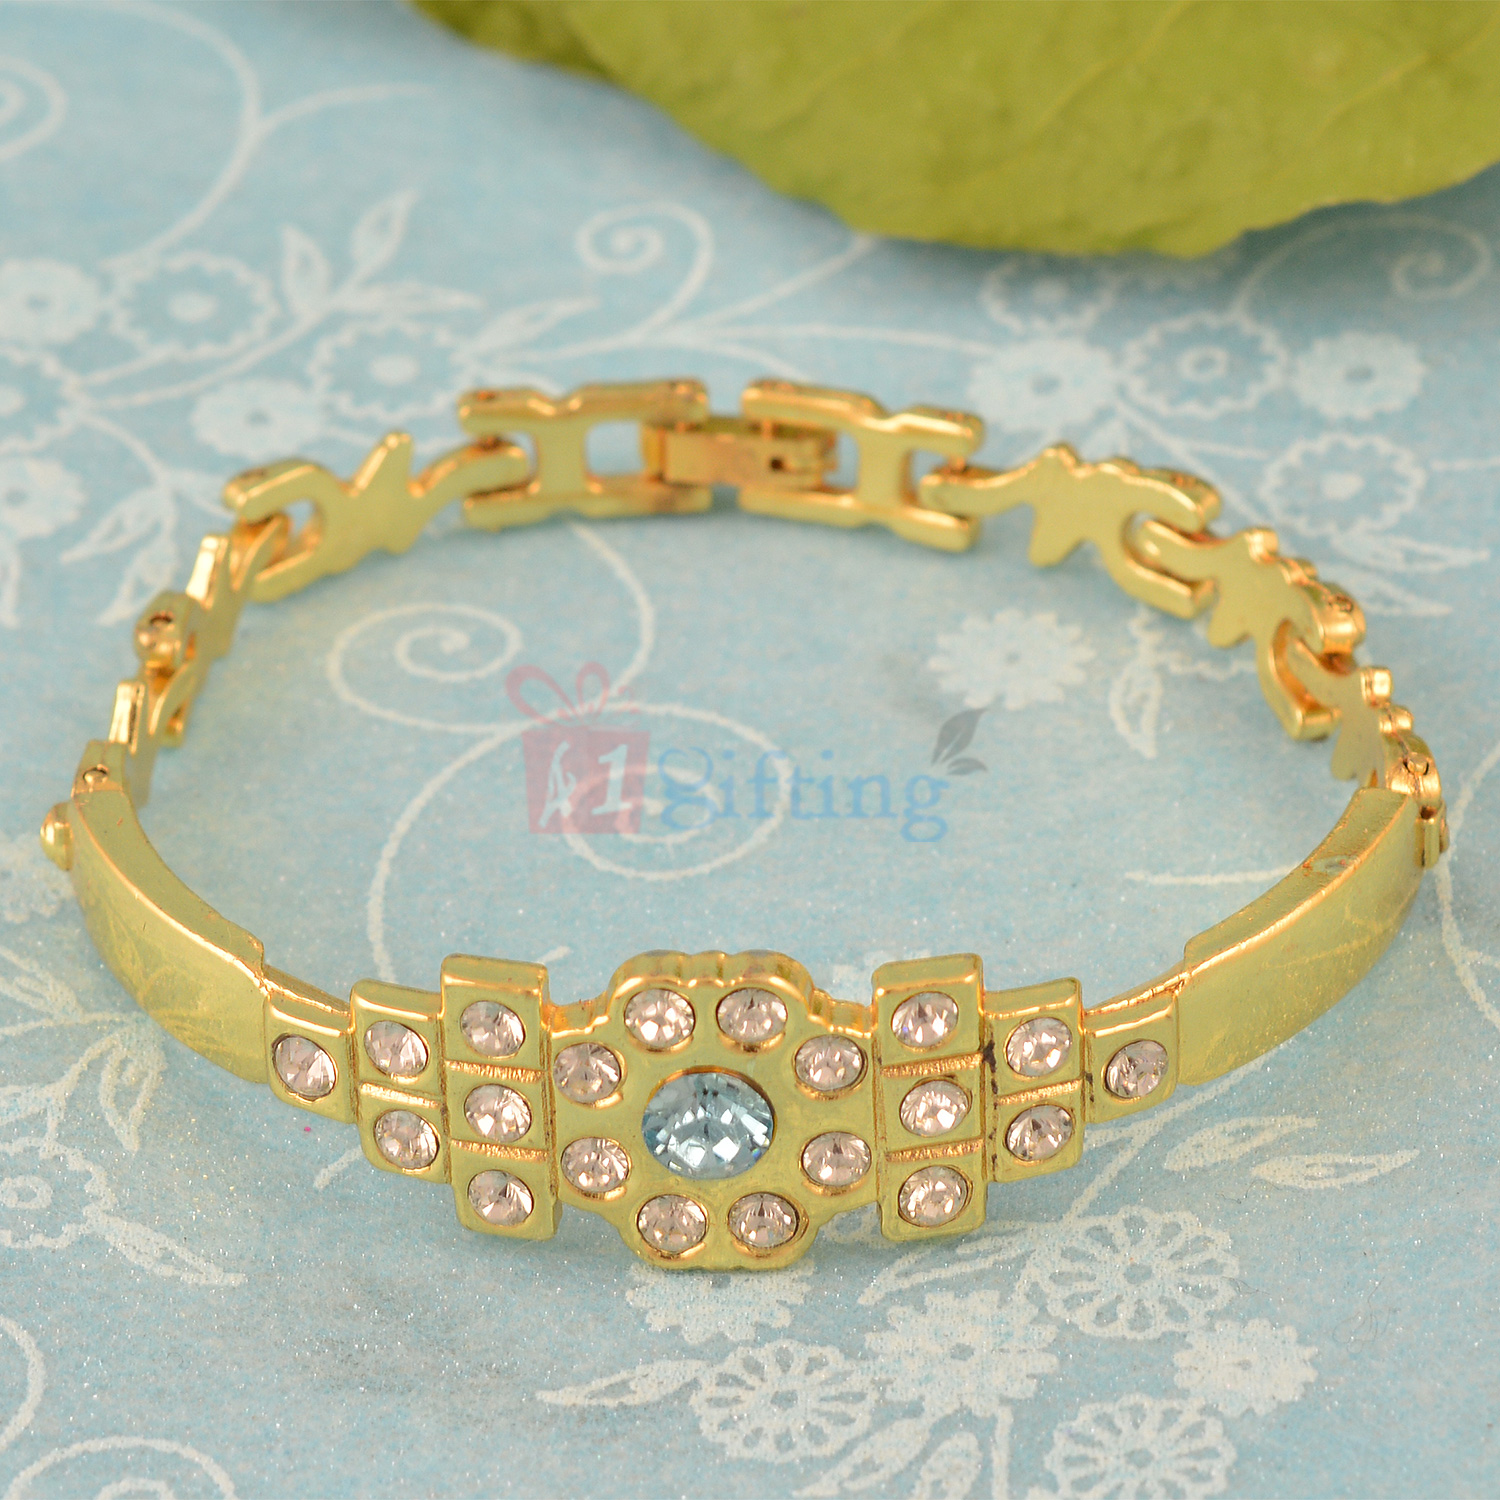 Golden Charm Bangle Bracelet with Stair Pattern and Diamonds